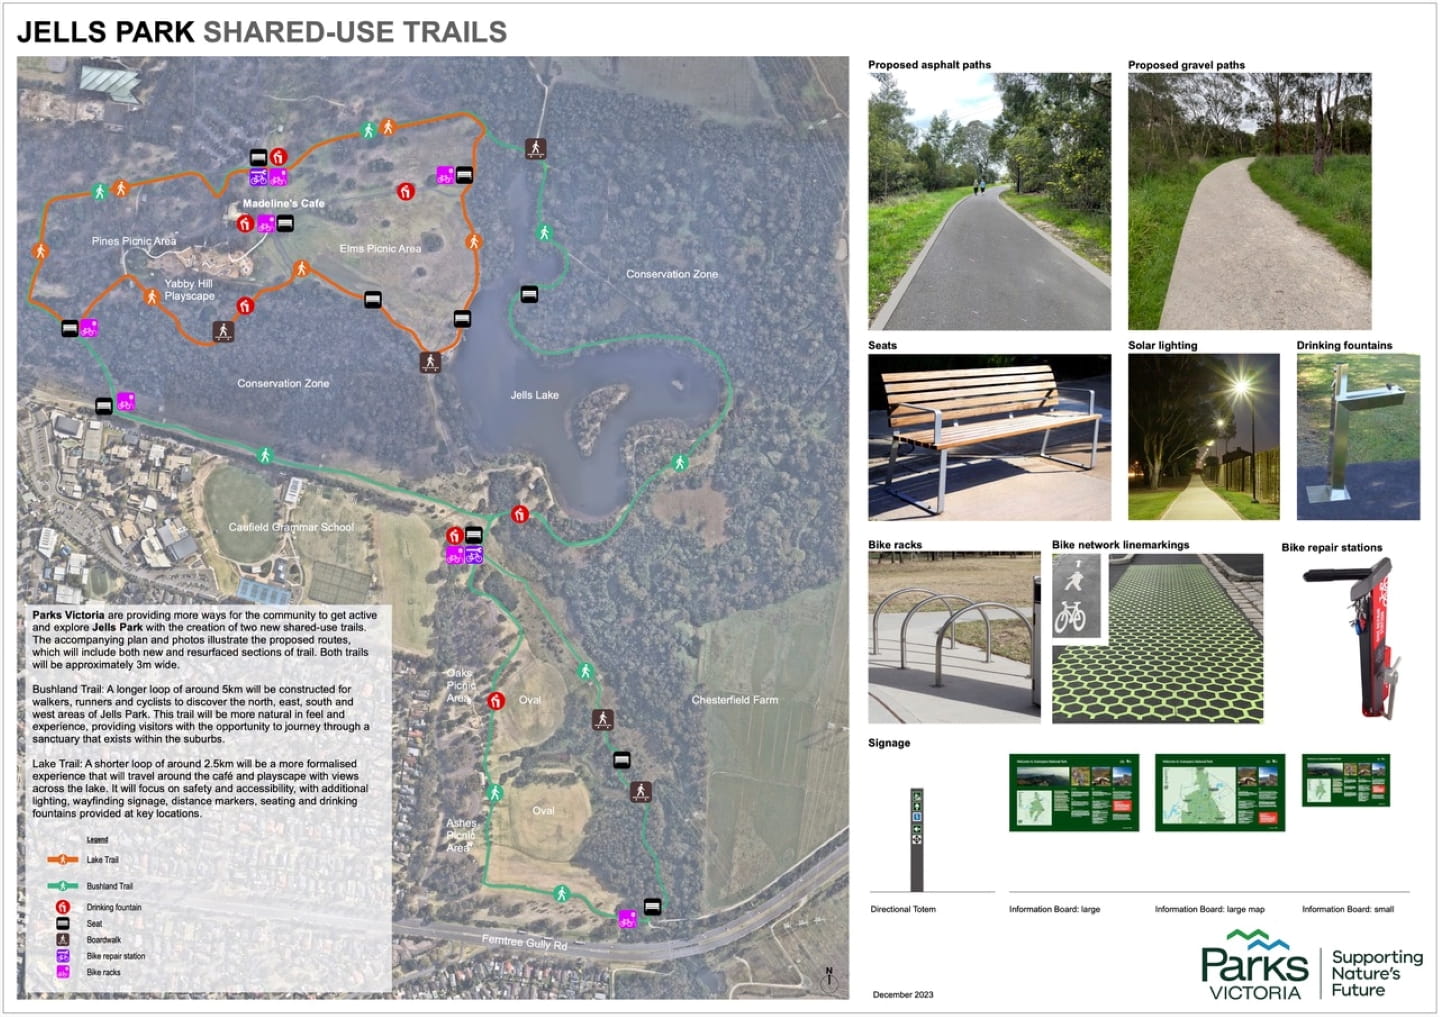 Map shows smaller Lake Trail in the northern section of the park looping through the cafe and playscape with views of the lake. This trail will focus on safety and accessibility with additional lighting, wayfinding signage, distance markers, seating and drinking fountains provided at key locations. The map also shows the longer Bushland Trail that will cover more of the southern and eastern parts of the park. This longer trail will be constructed for walkers, runners and cyclists to discover the north ,east, south and west areas of Jells Park. It will have more of a natural feel and experience. The map also shows example images of the different features the trail will include, such as asphalt and gravel paths, a wooden park bench, tall path lamps powered by solar energy, a metal drinking fountain, metal circular bike racks, bike network linemarkings which in some sections will appear like glow in the dark honeycomb across the asphalt sections of the trail, bike repair stations which include screwdrivers. wrenches and a tire pump, signage including directional totems, big, medium and mall information boards.  